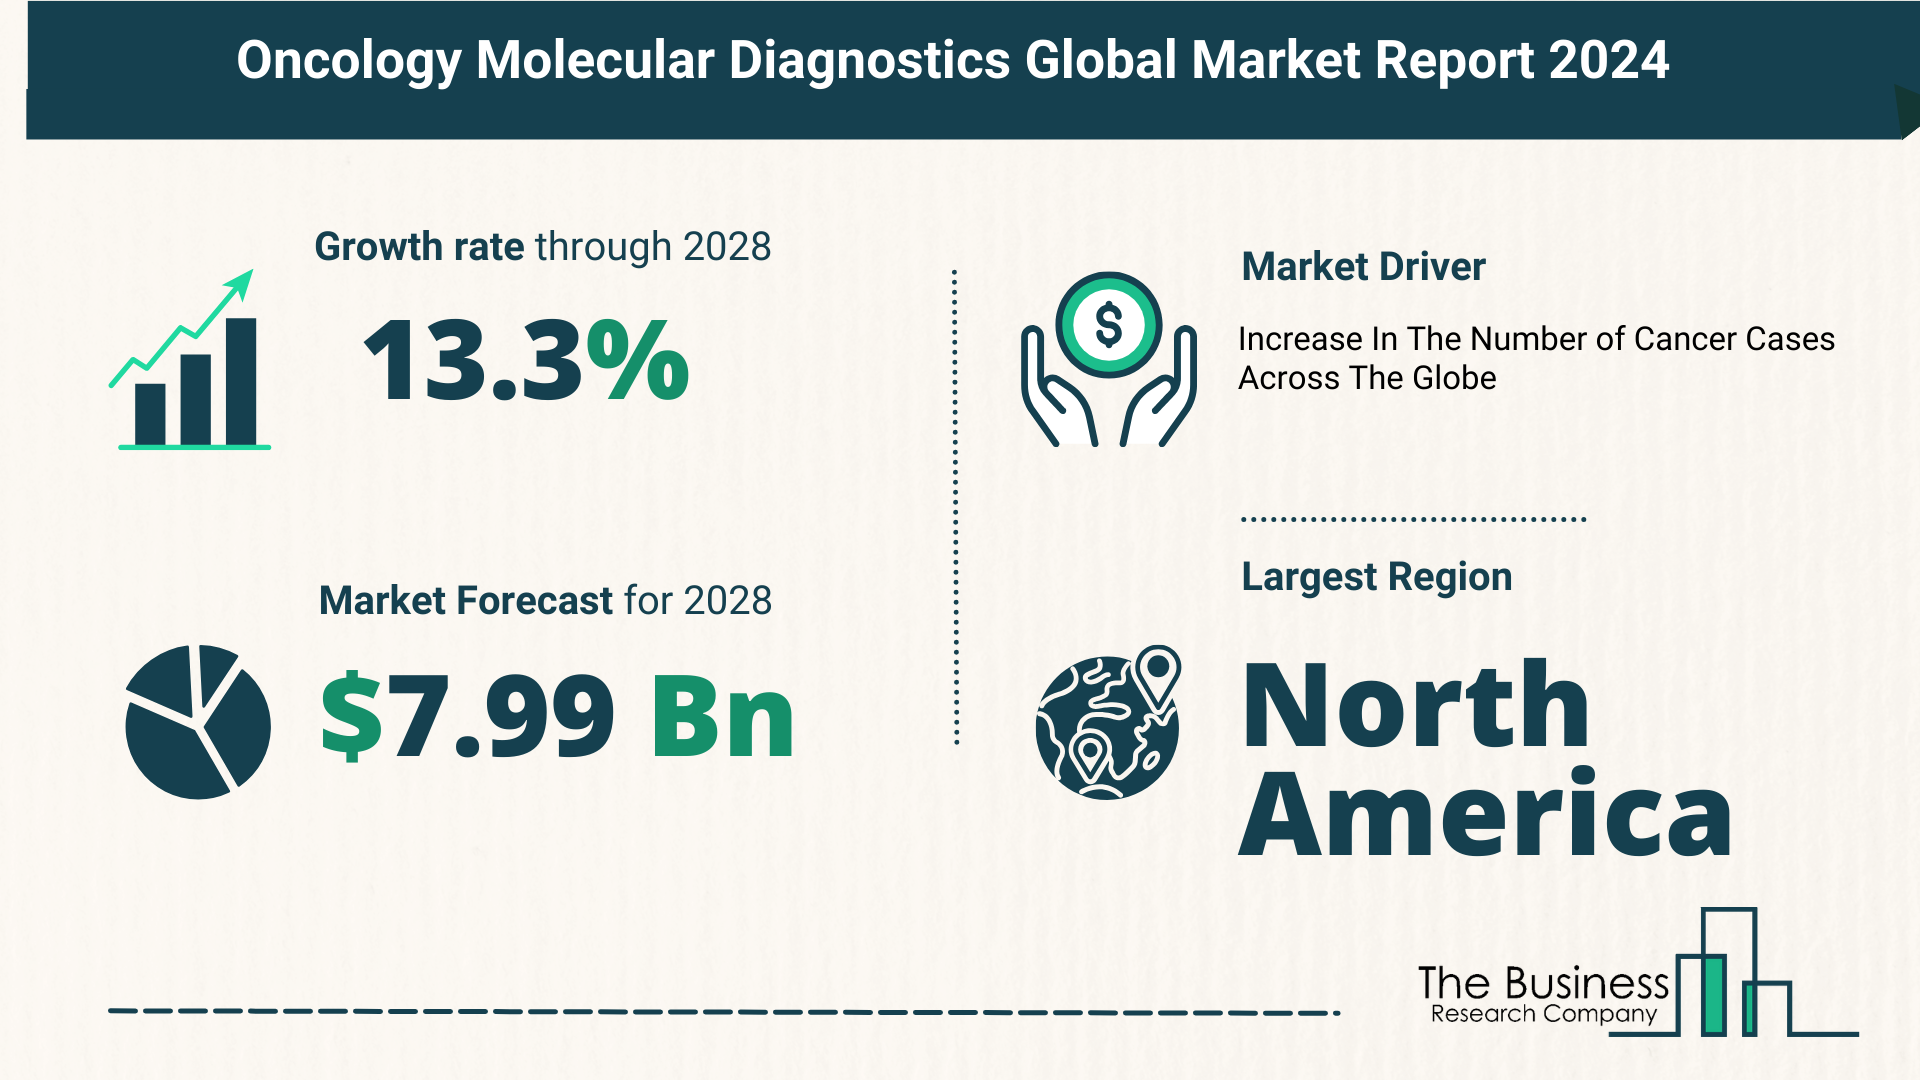 How Is The Oncology Molecular Diagnostics Market Expected To Grow Through 2024-2033